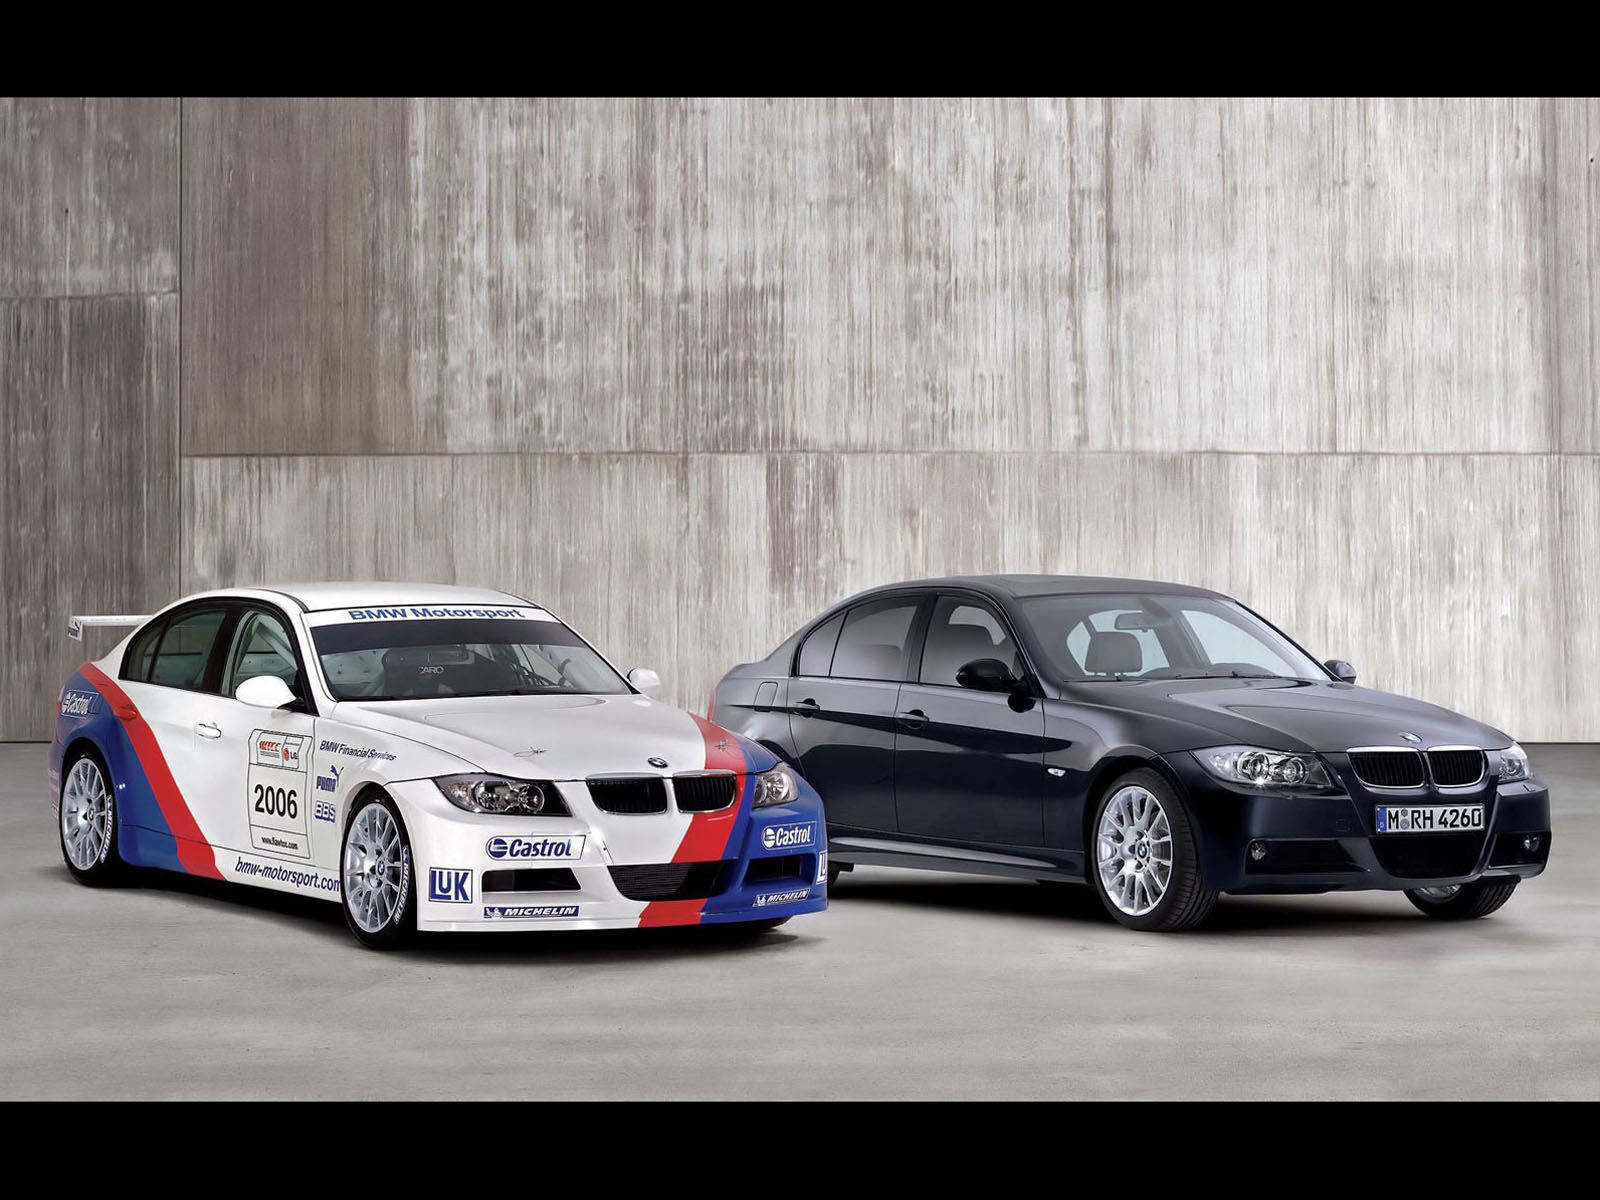 BMW 320si Cars Wallpapers. Email ThisBlogThis!